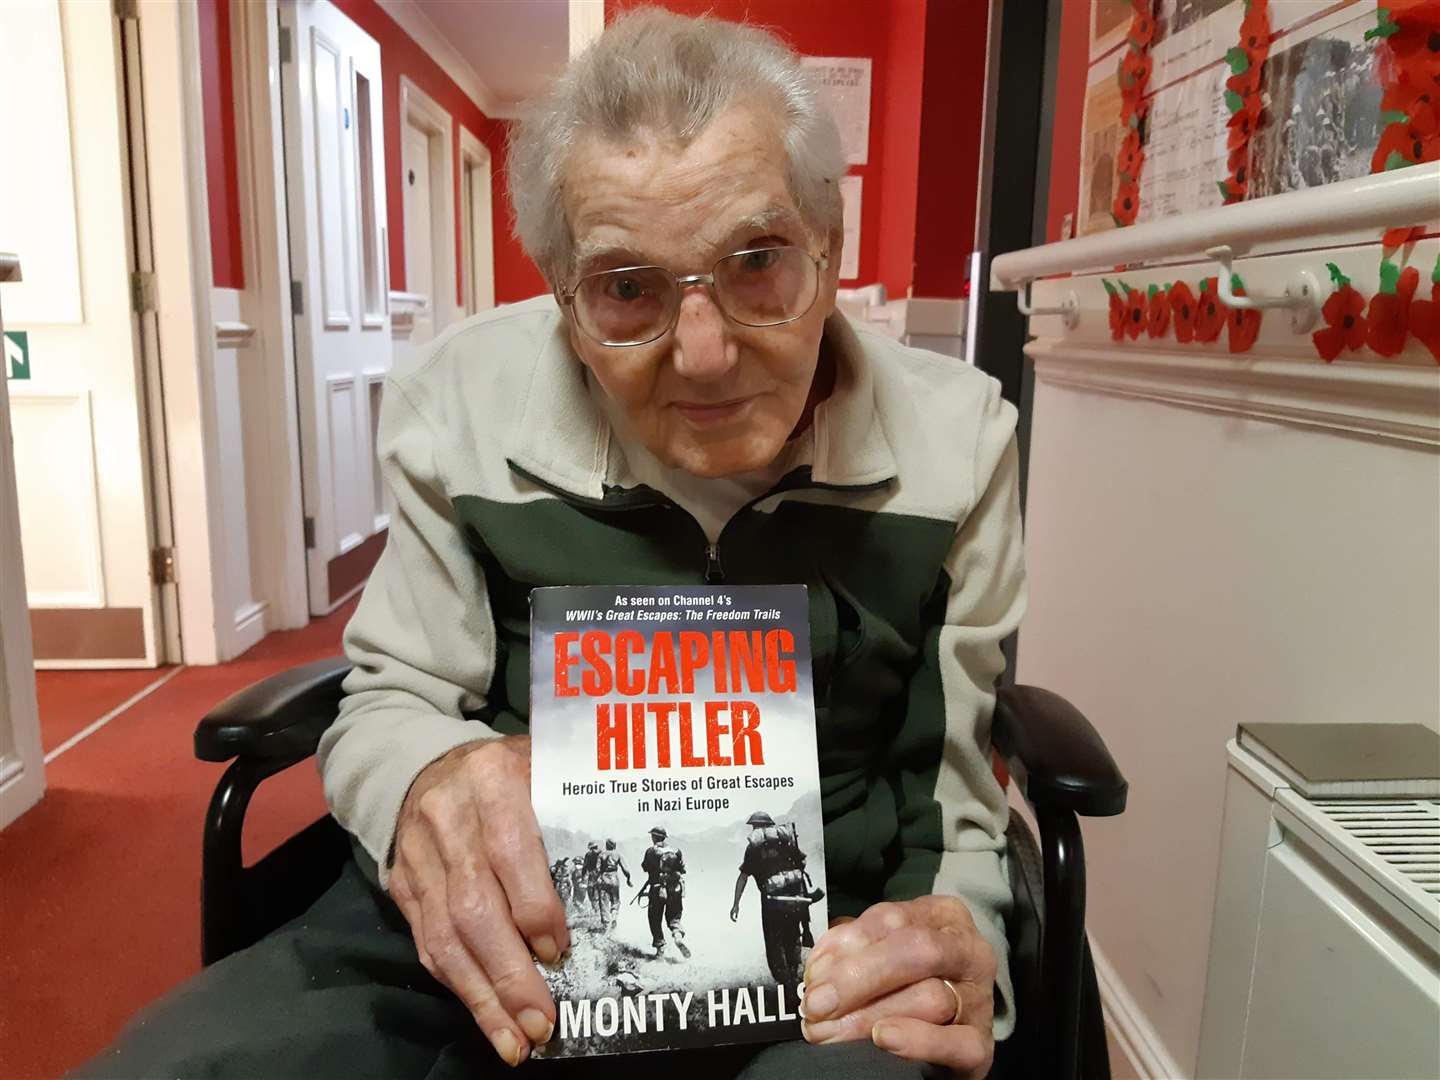 RAF veteran Bob Frost's story of how he evaded capture by the Nazis in 1942 is documented in books (5344670)